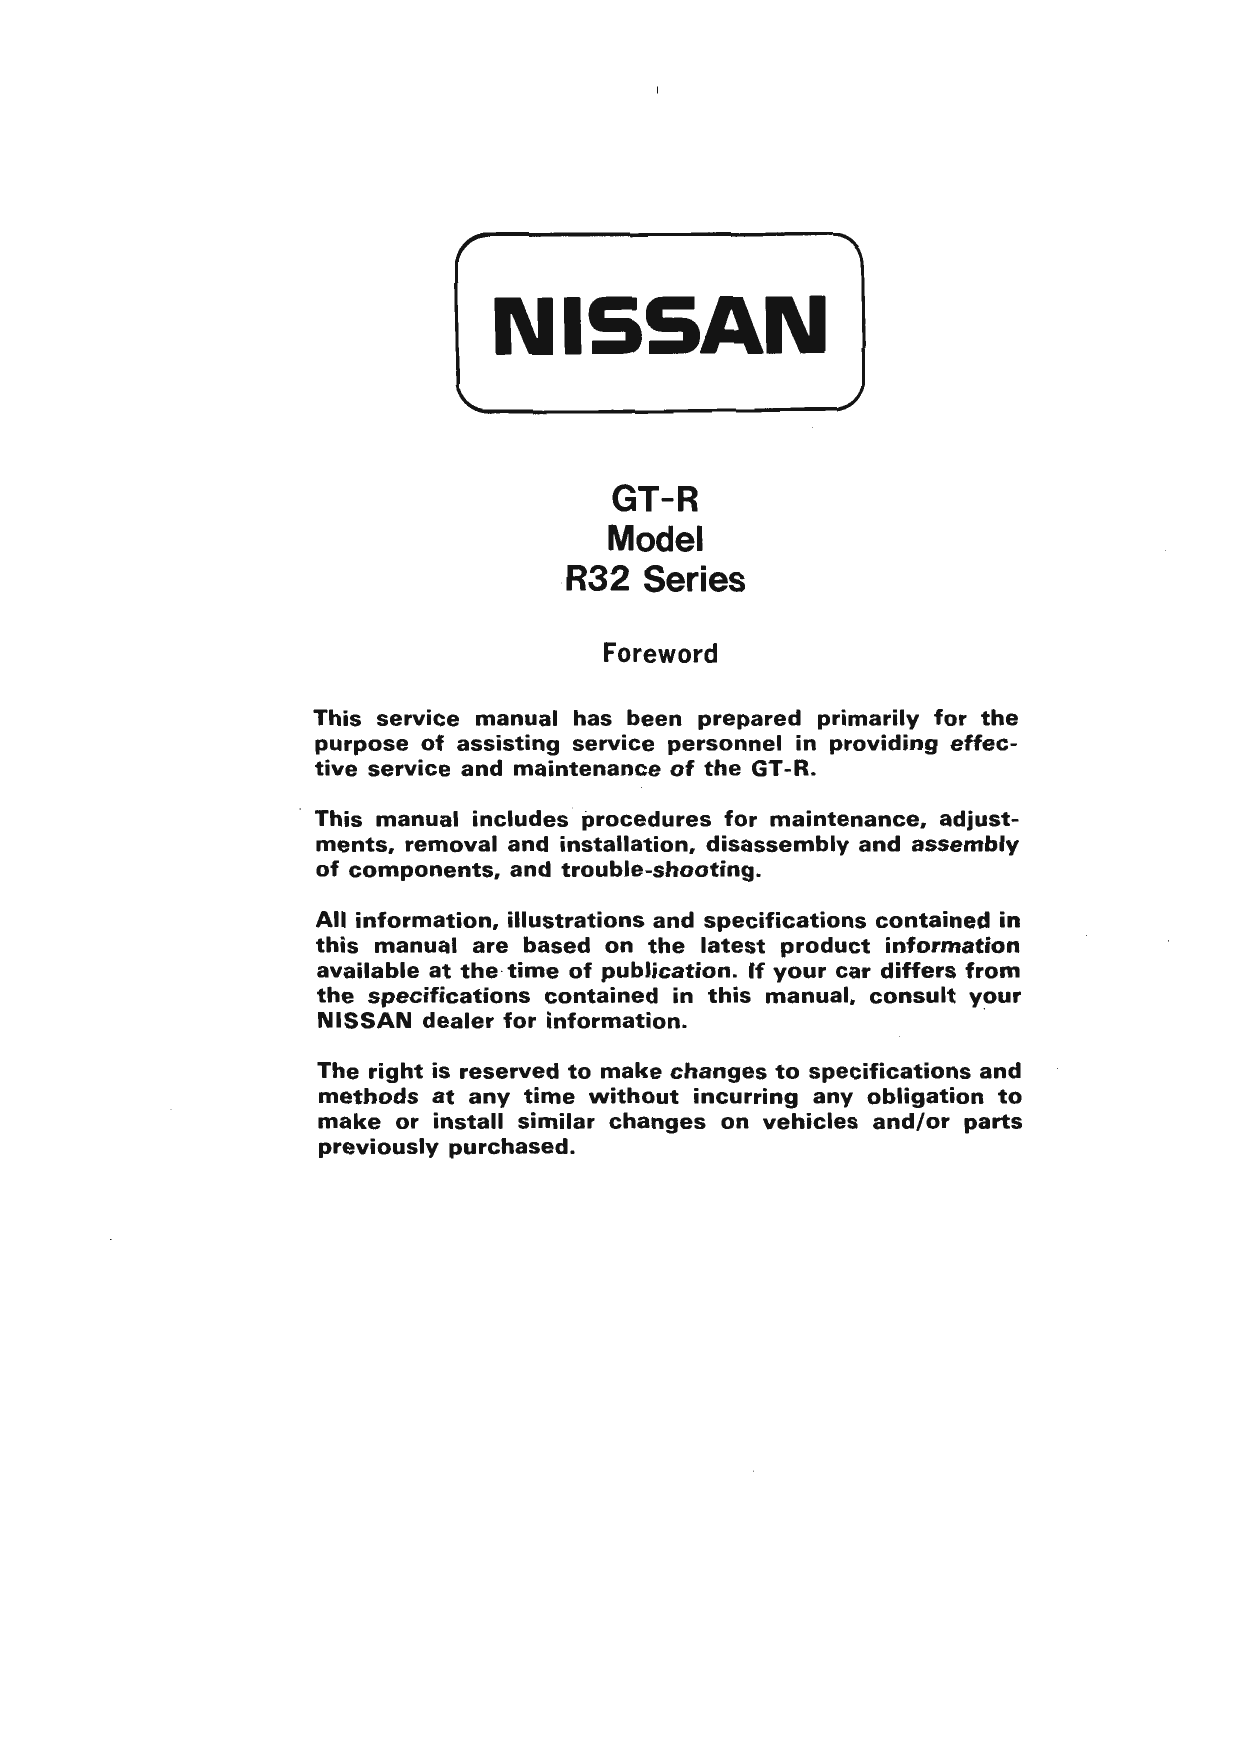 Nissan Skyline R32 GTR service and shop manual Preview image 1